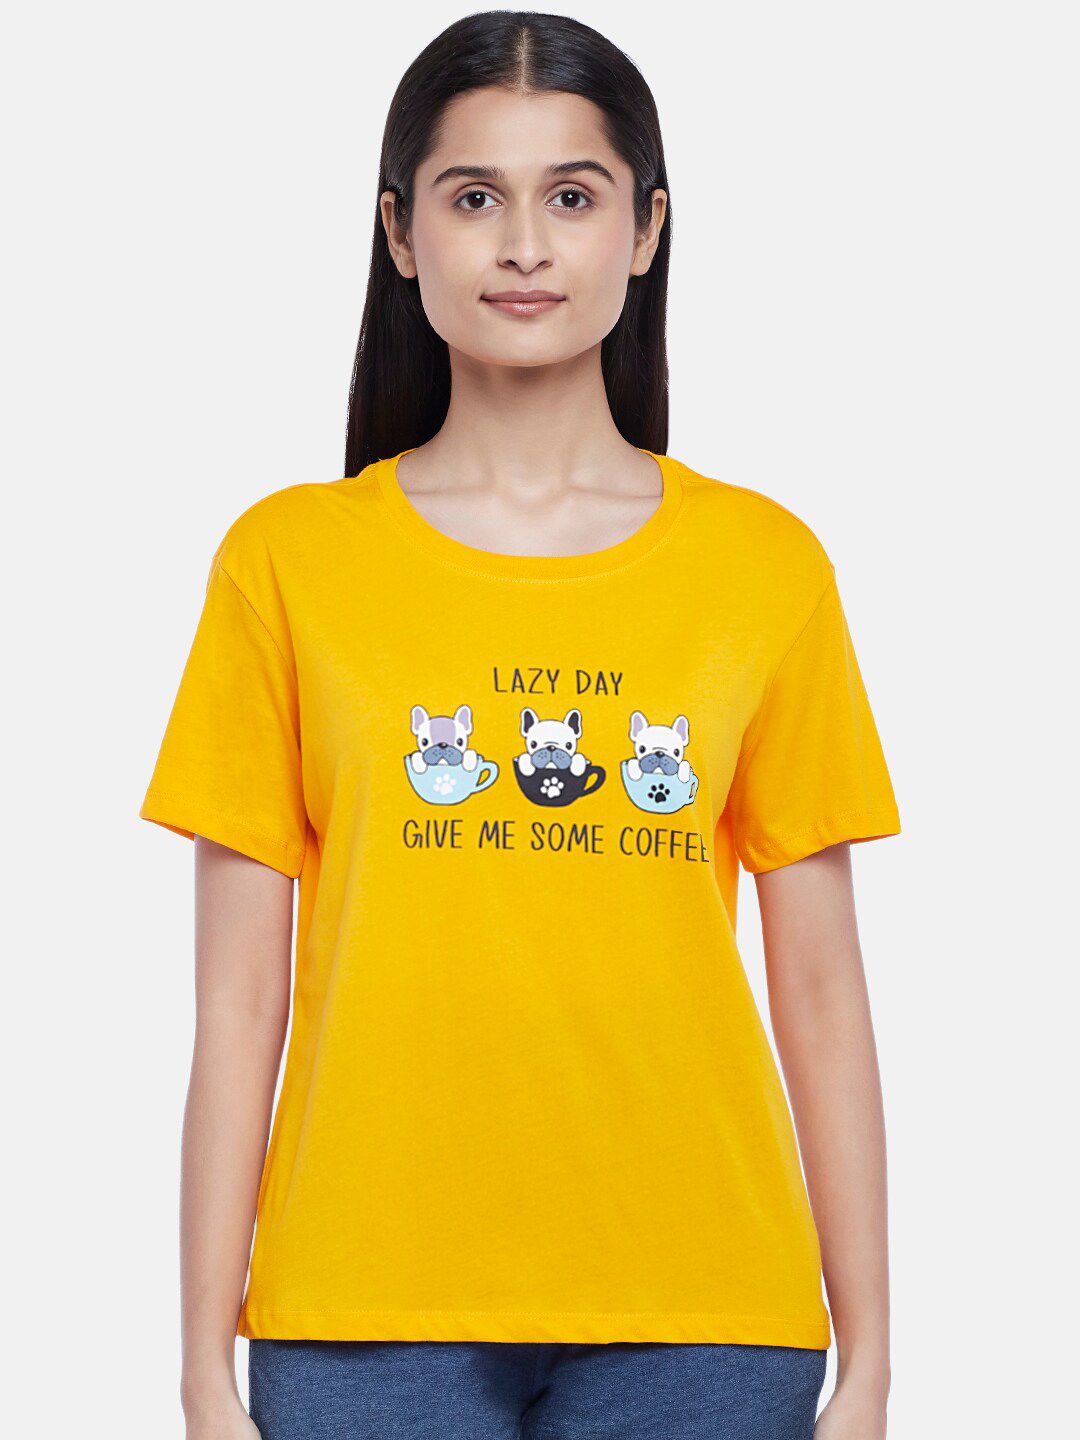 Dreamz by Pantaloons Women Yellow Printed Cotton Lounge tshirt Price in India